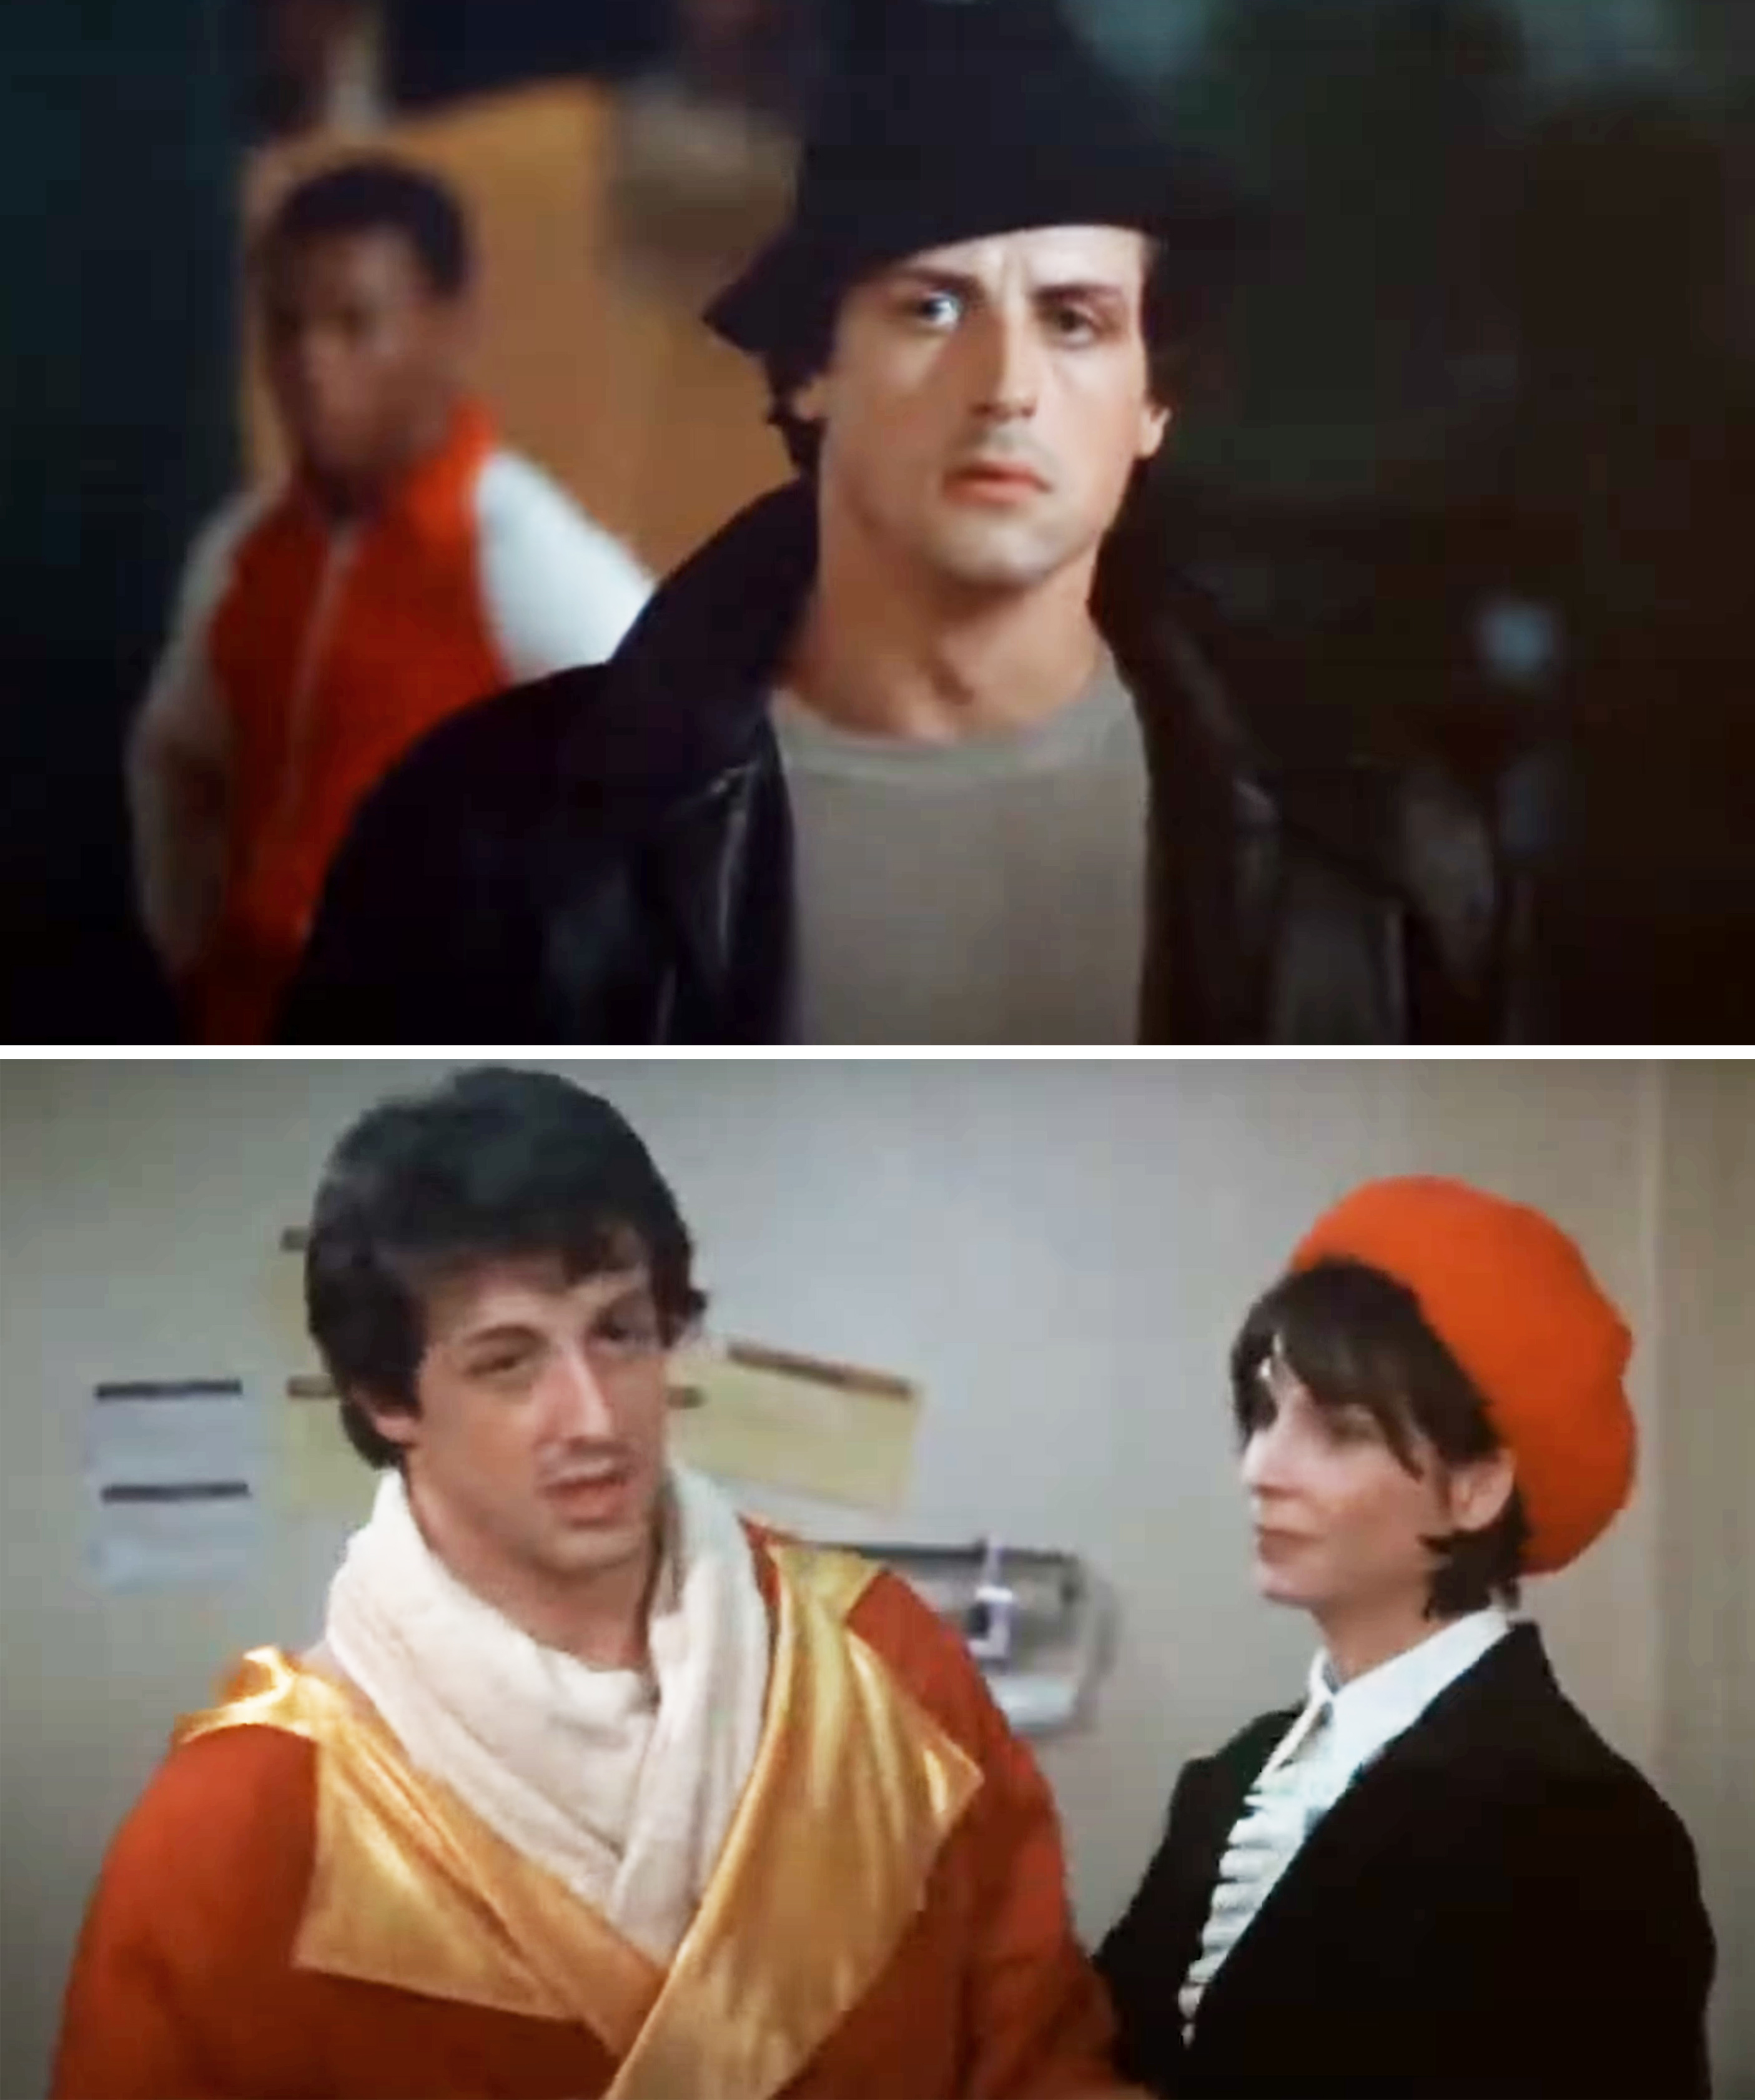 Sylvester Stallone as Rocky in a black leather jacket and Adrian in an orange beanie and black coat in scenes from the movie Rocky